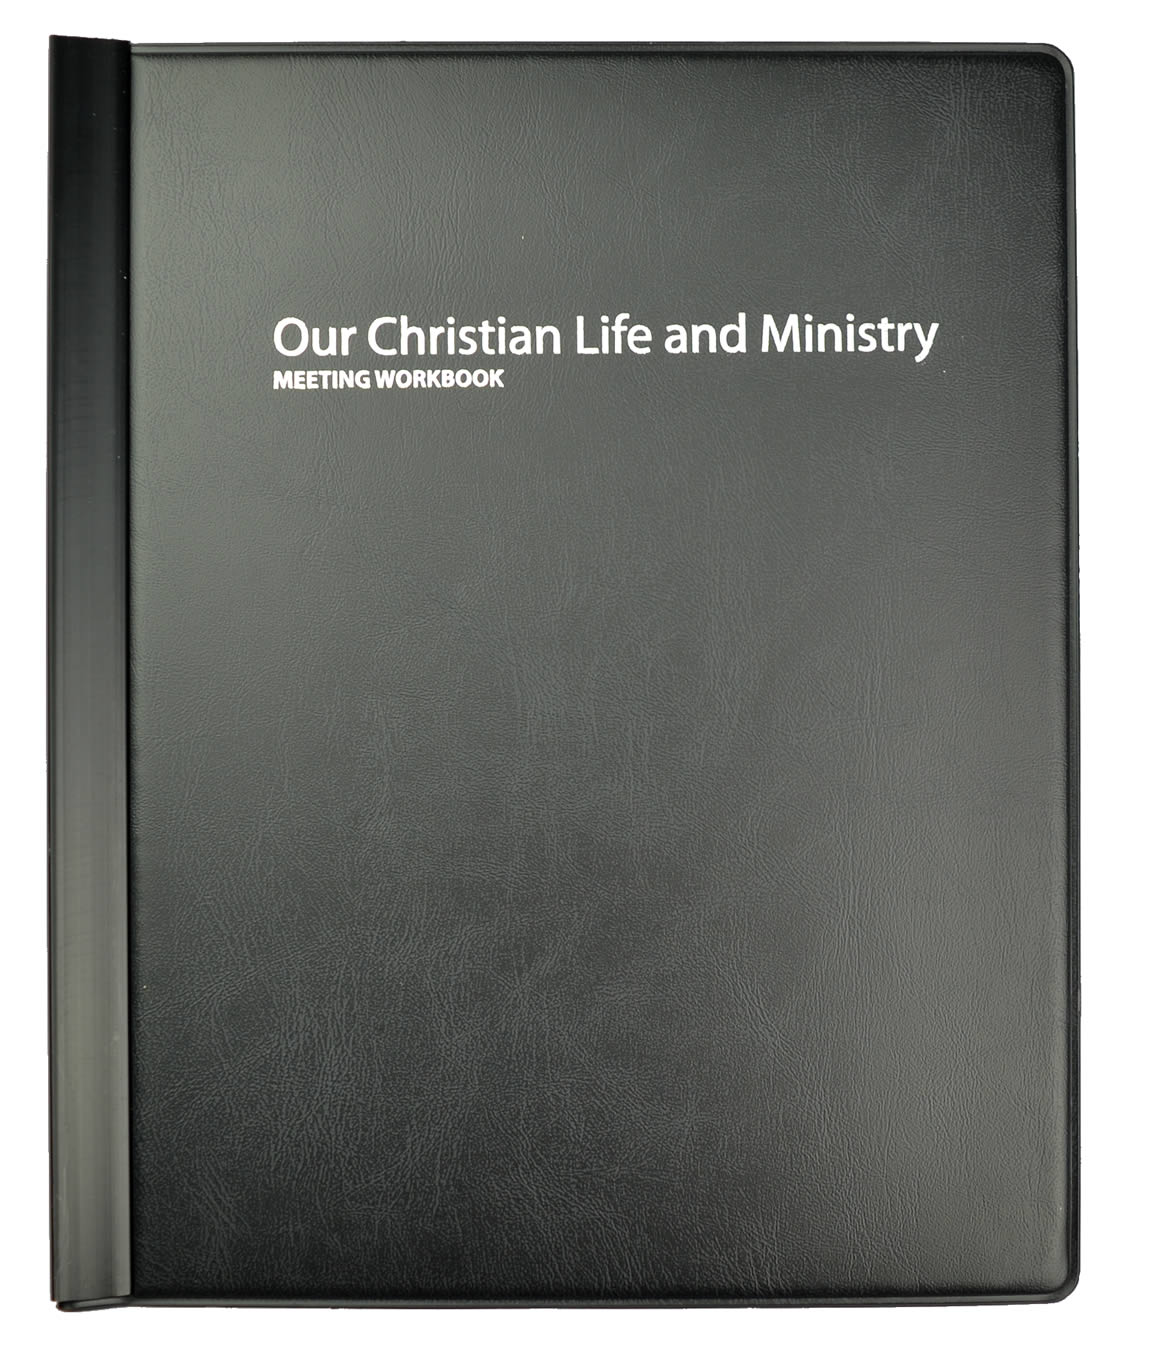 Our Christian Life and Ministry Meeting Workbook Folder - BLACK  - BLACK